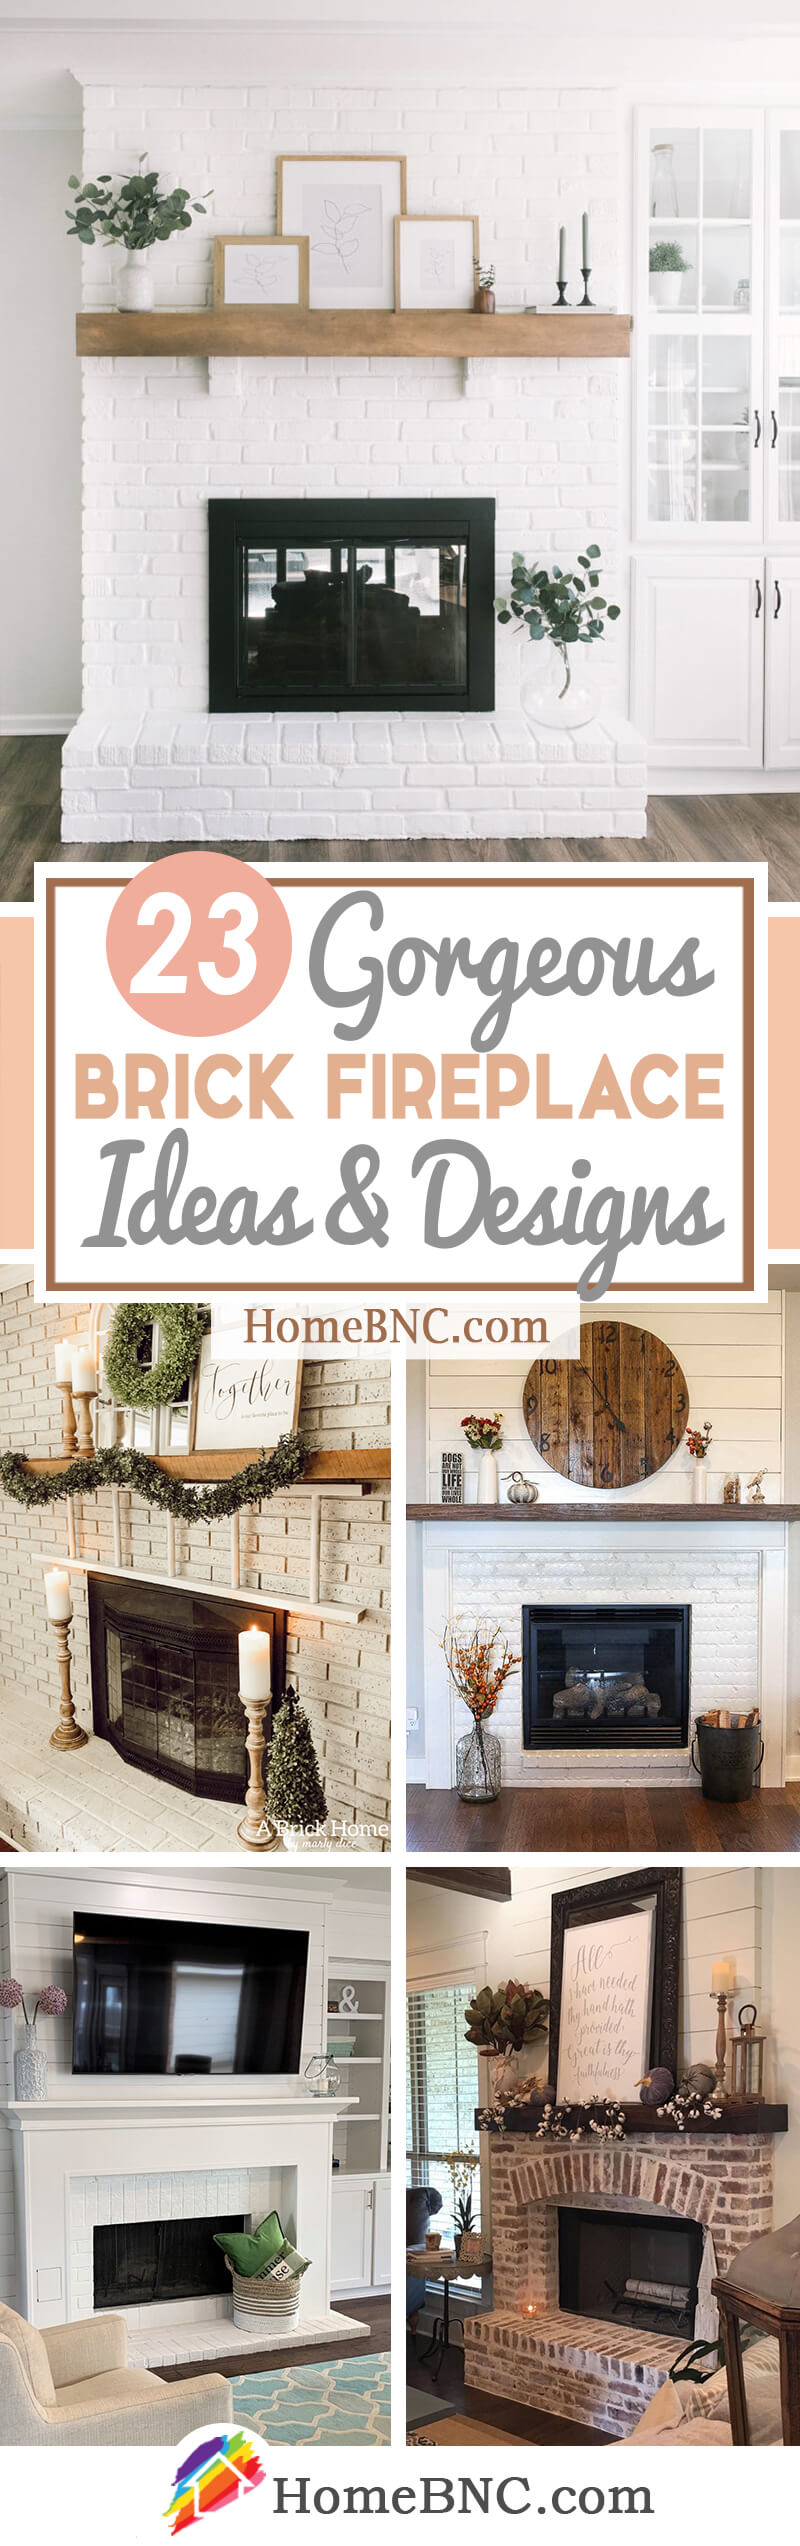 23 Best Brick Fireplace Ideas To Make, How To Make A Red Brick Fireplace Look Better